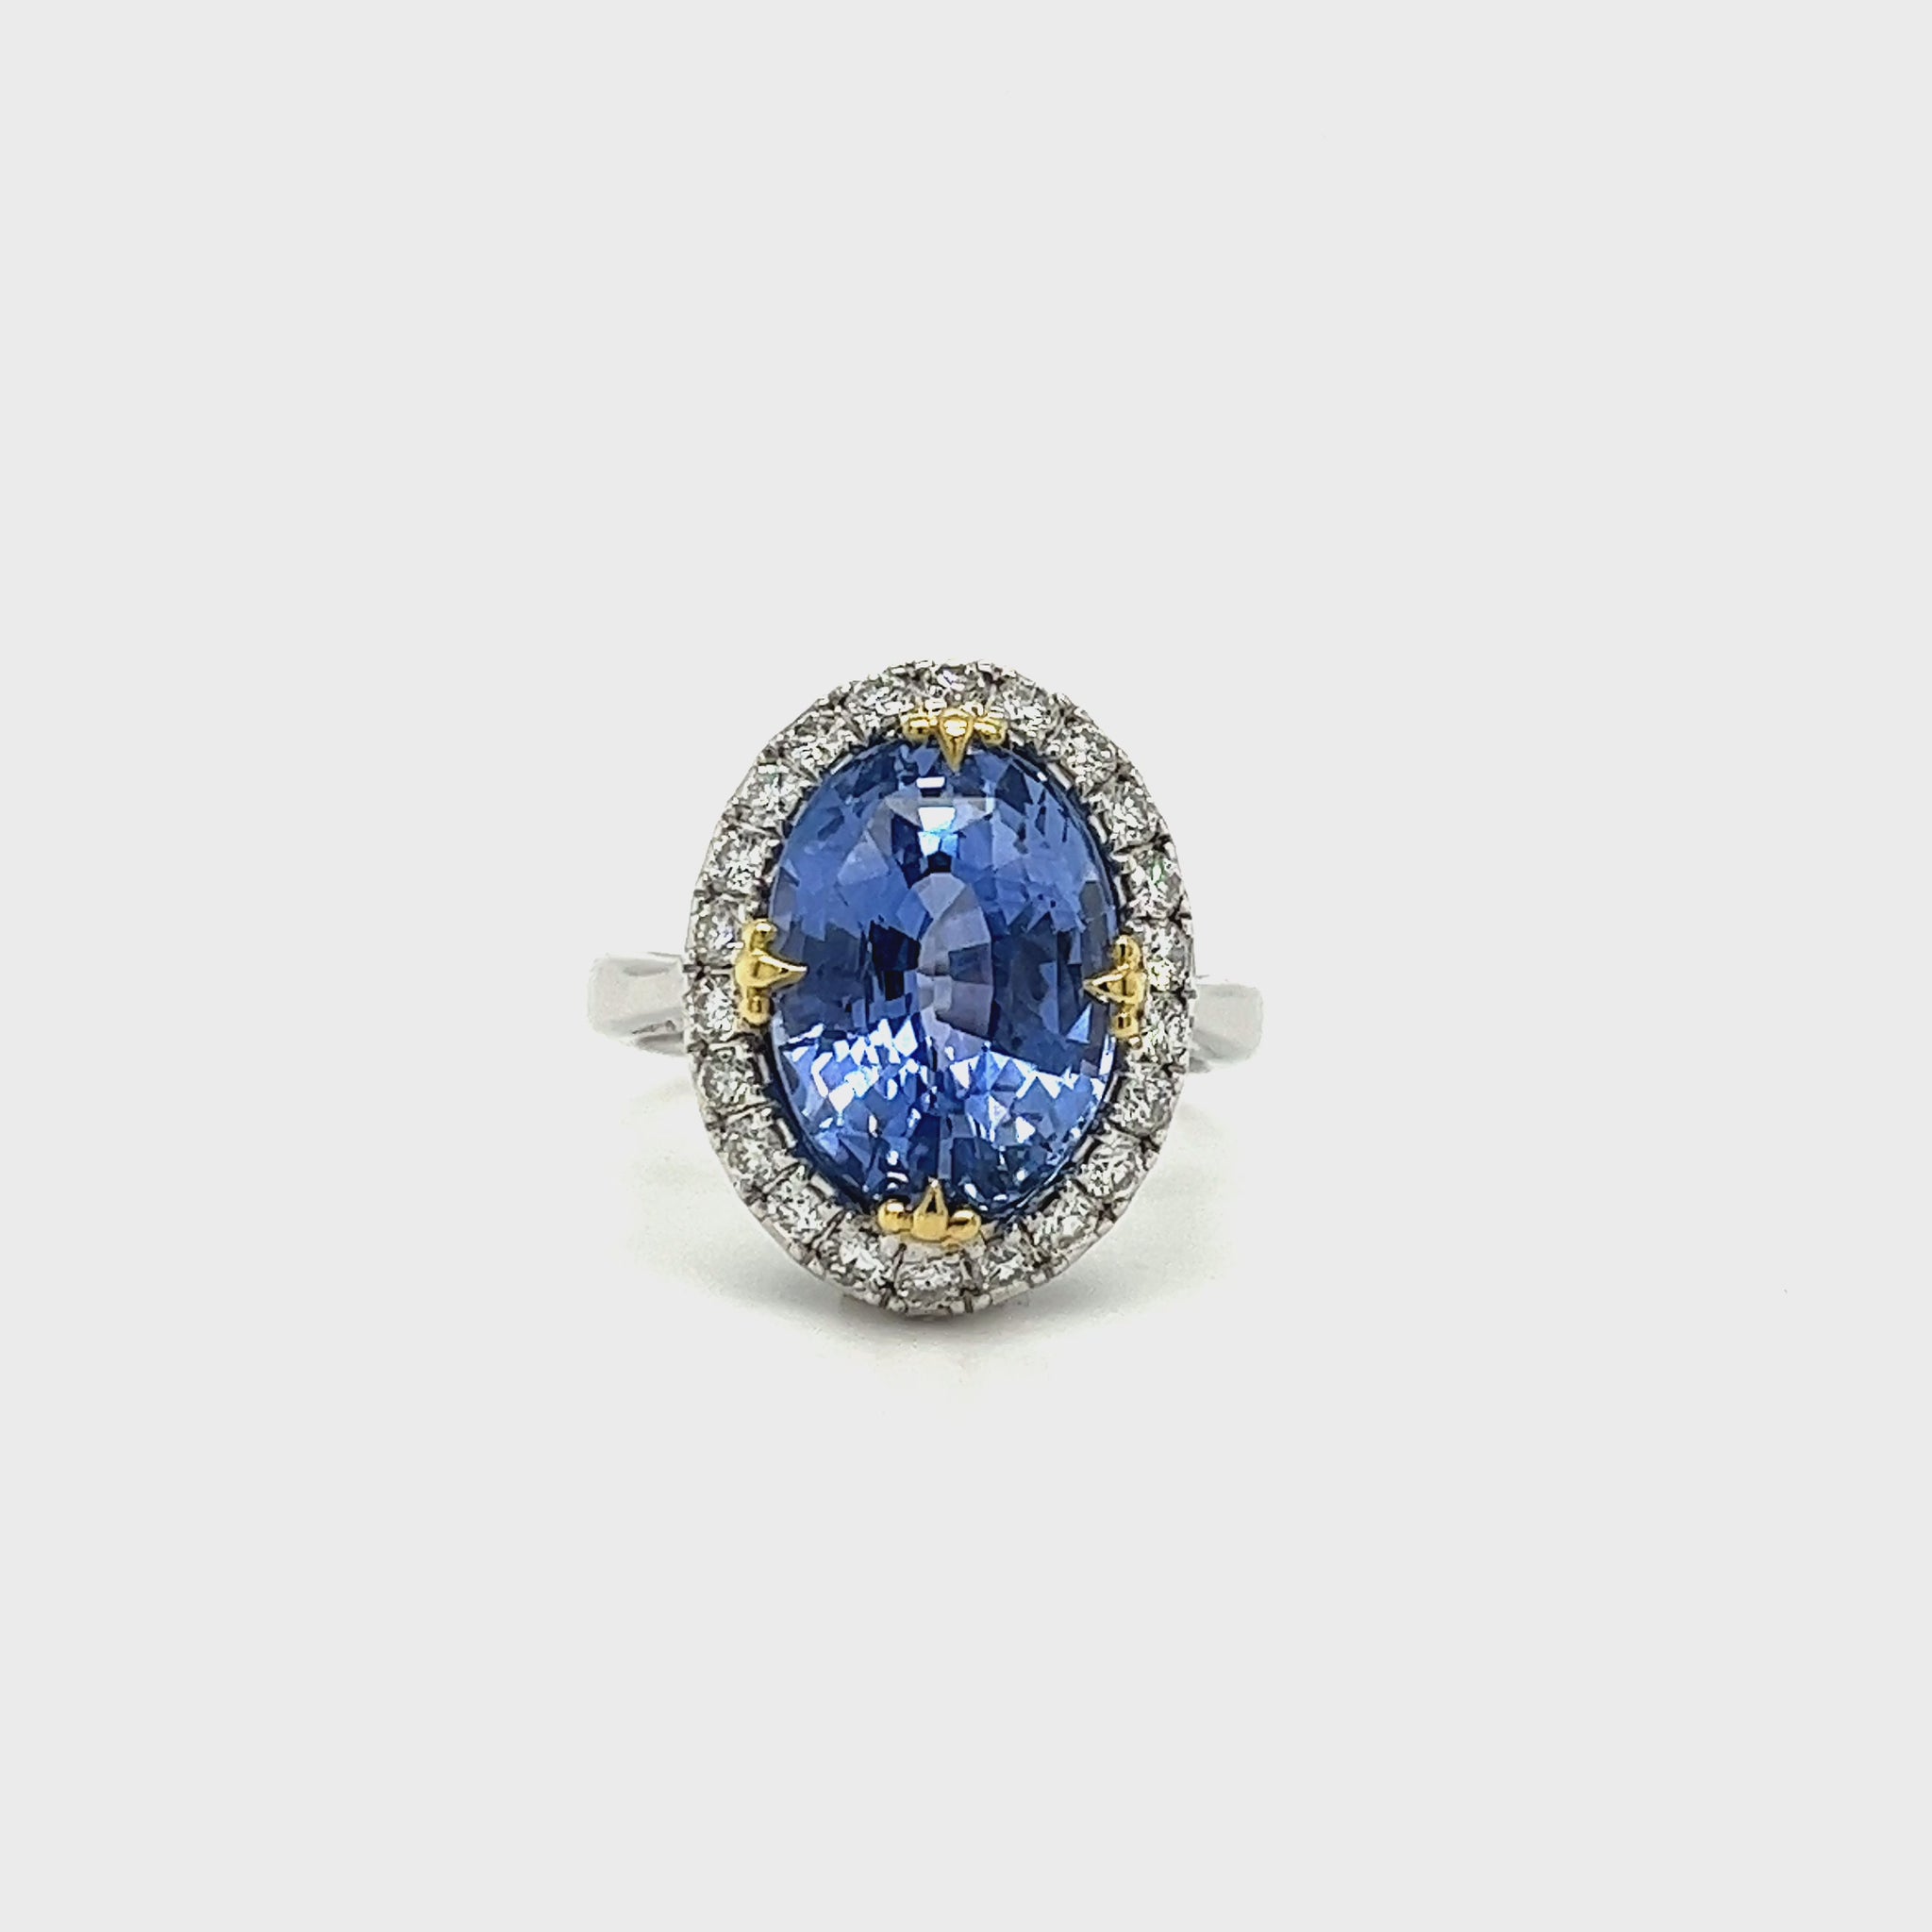 A, captivating, oval, sapphire, center, stone, surrounded, by, sparkling, diamonds, set, in, a, halo, design, atop, a, polished, band.